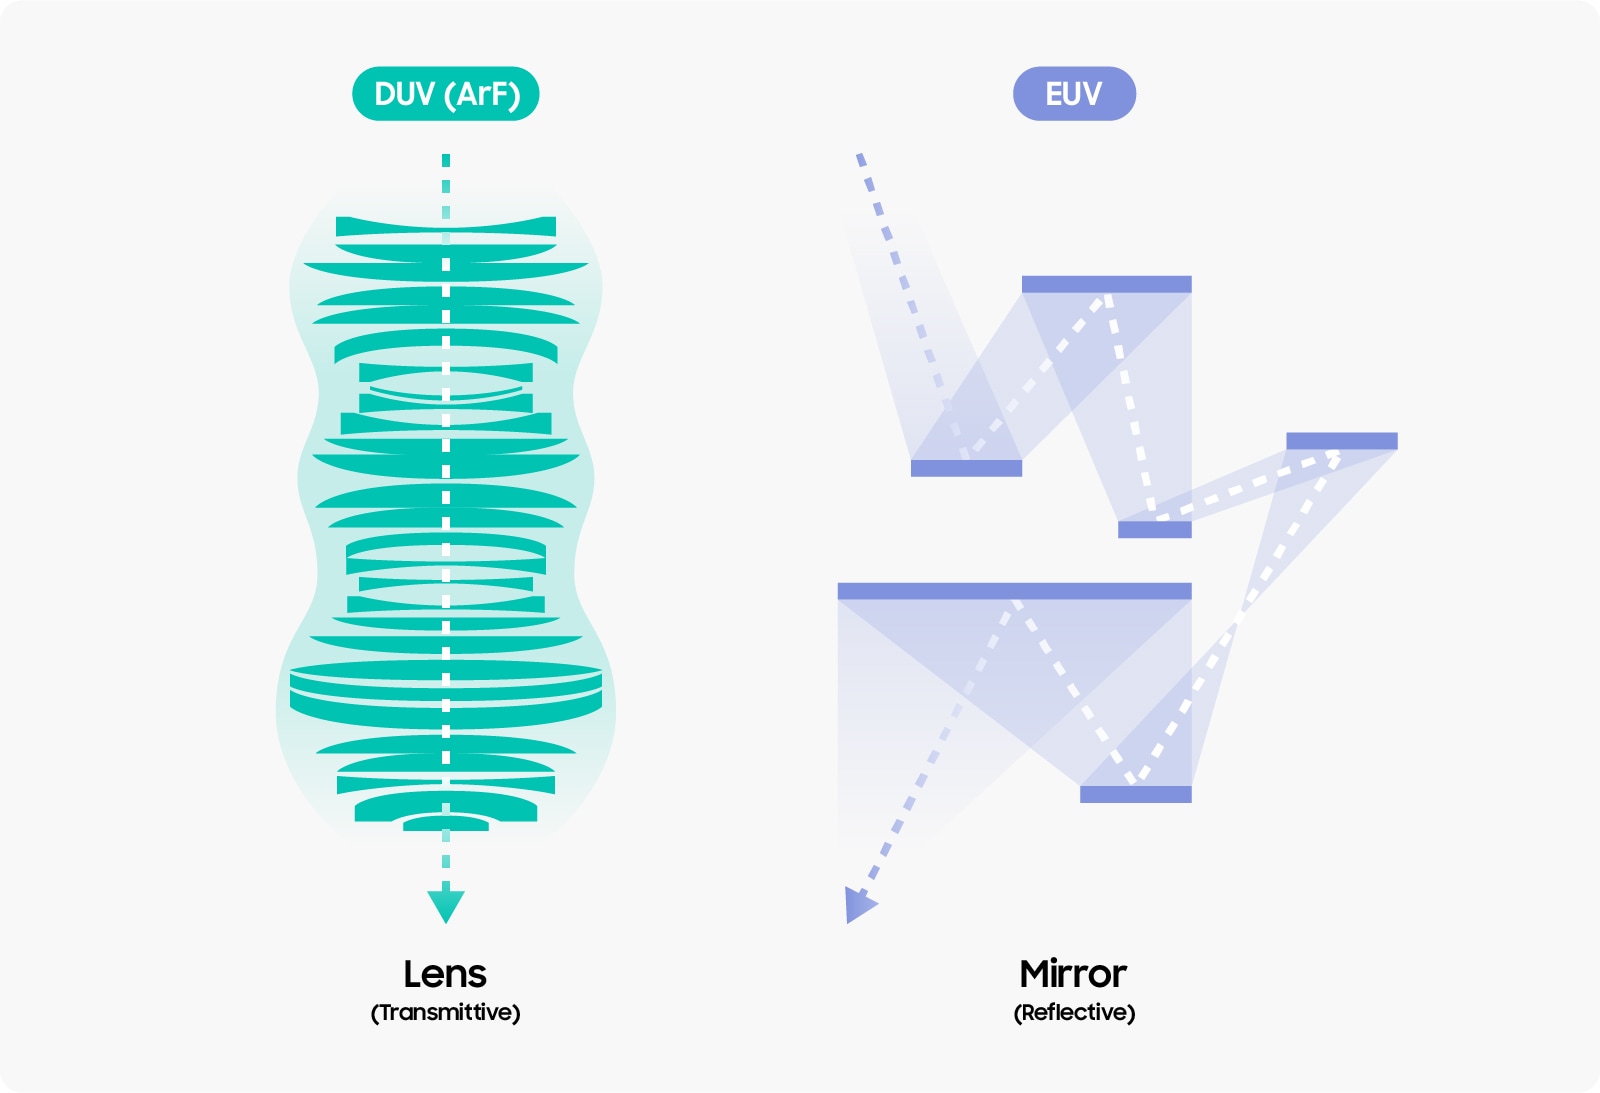 Figure [5] Up to DUV, lenses were used to focus light. However, the short wavelength of EUV means much of the light is absorbed when passed through a lens. Absorption rates are relatively lower when light is reflected, instead of transmitted. Accordingly, mirrors are used for EUV light.